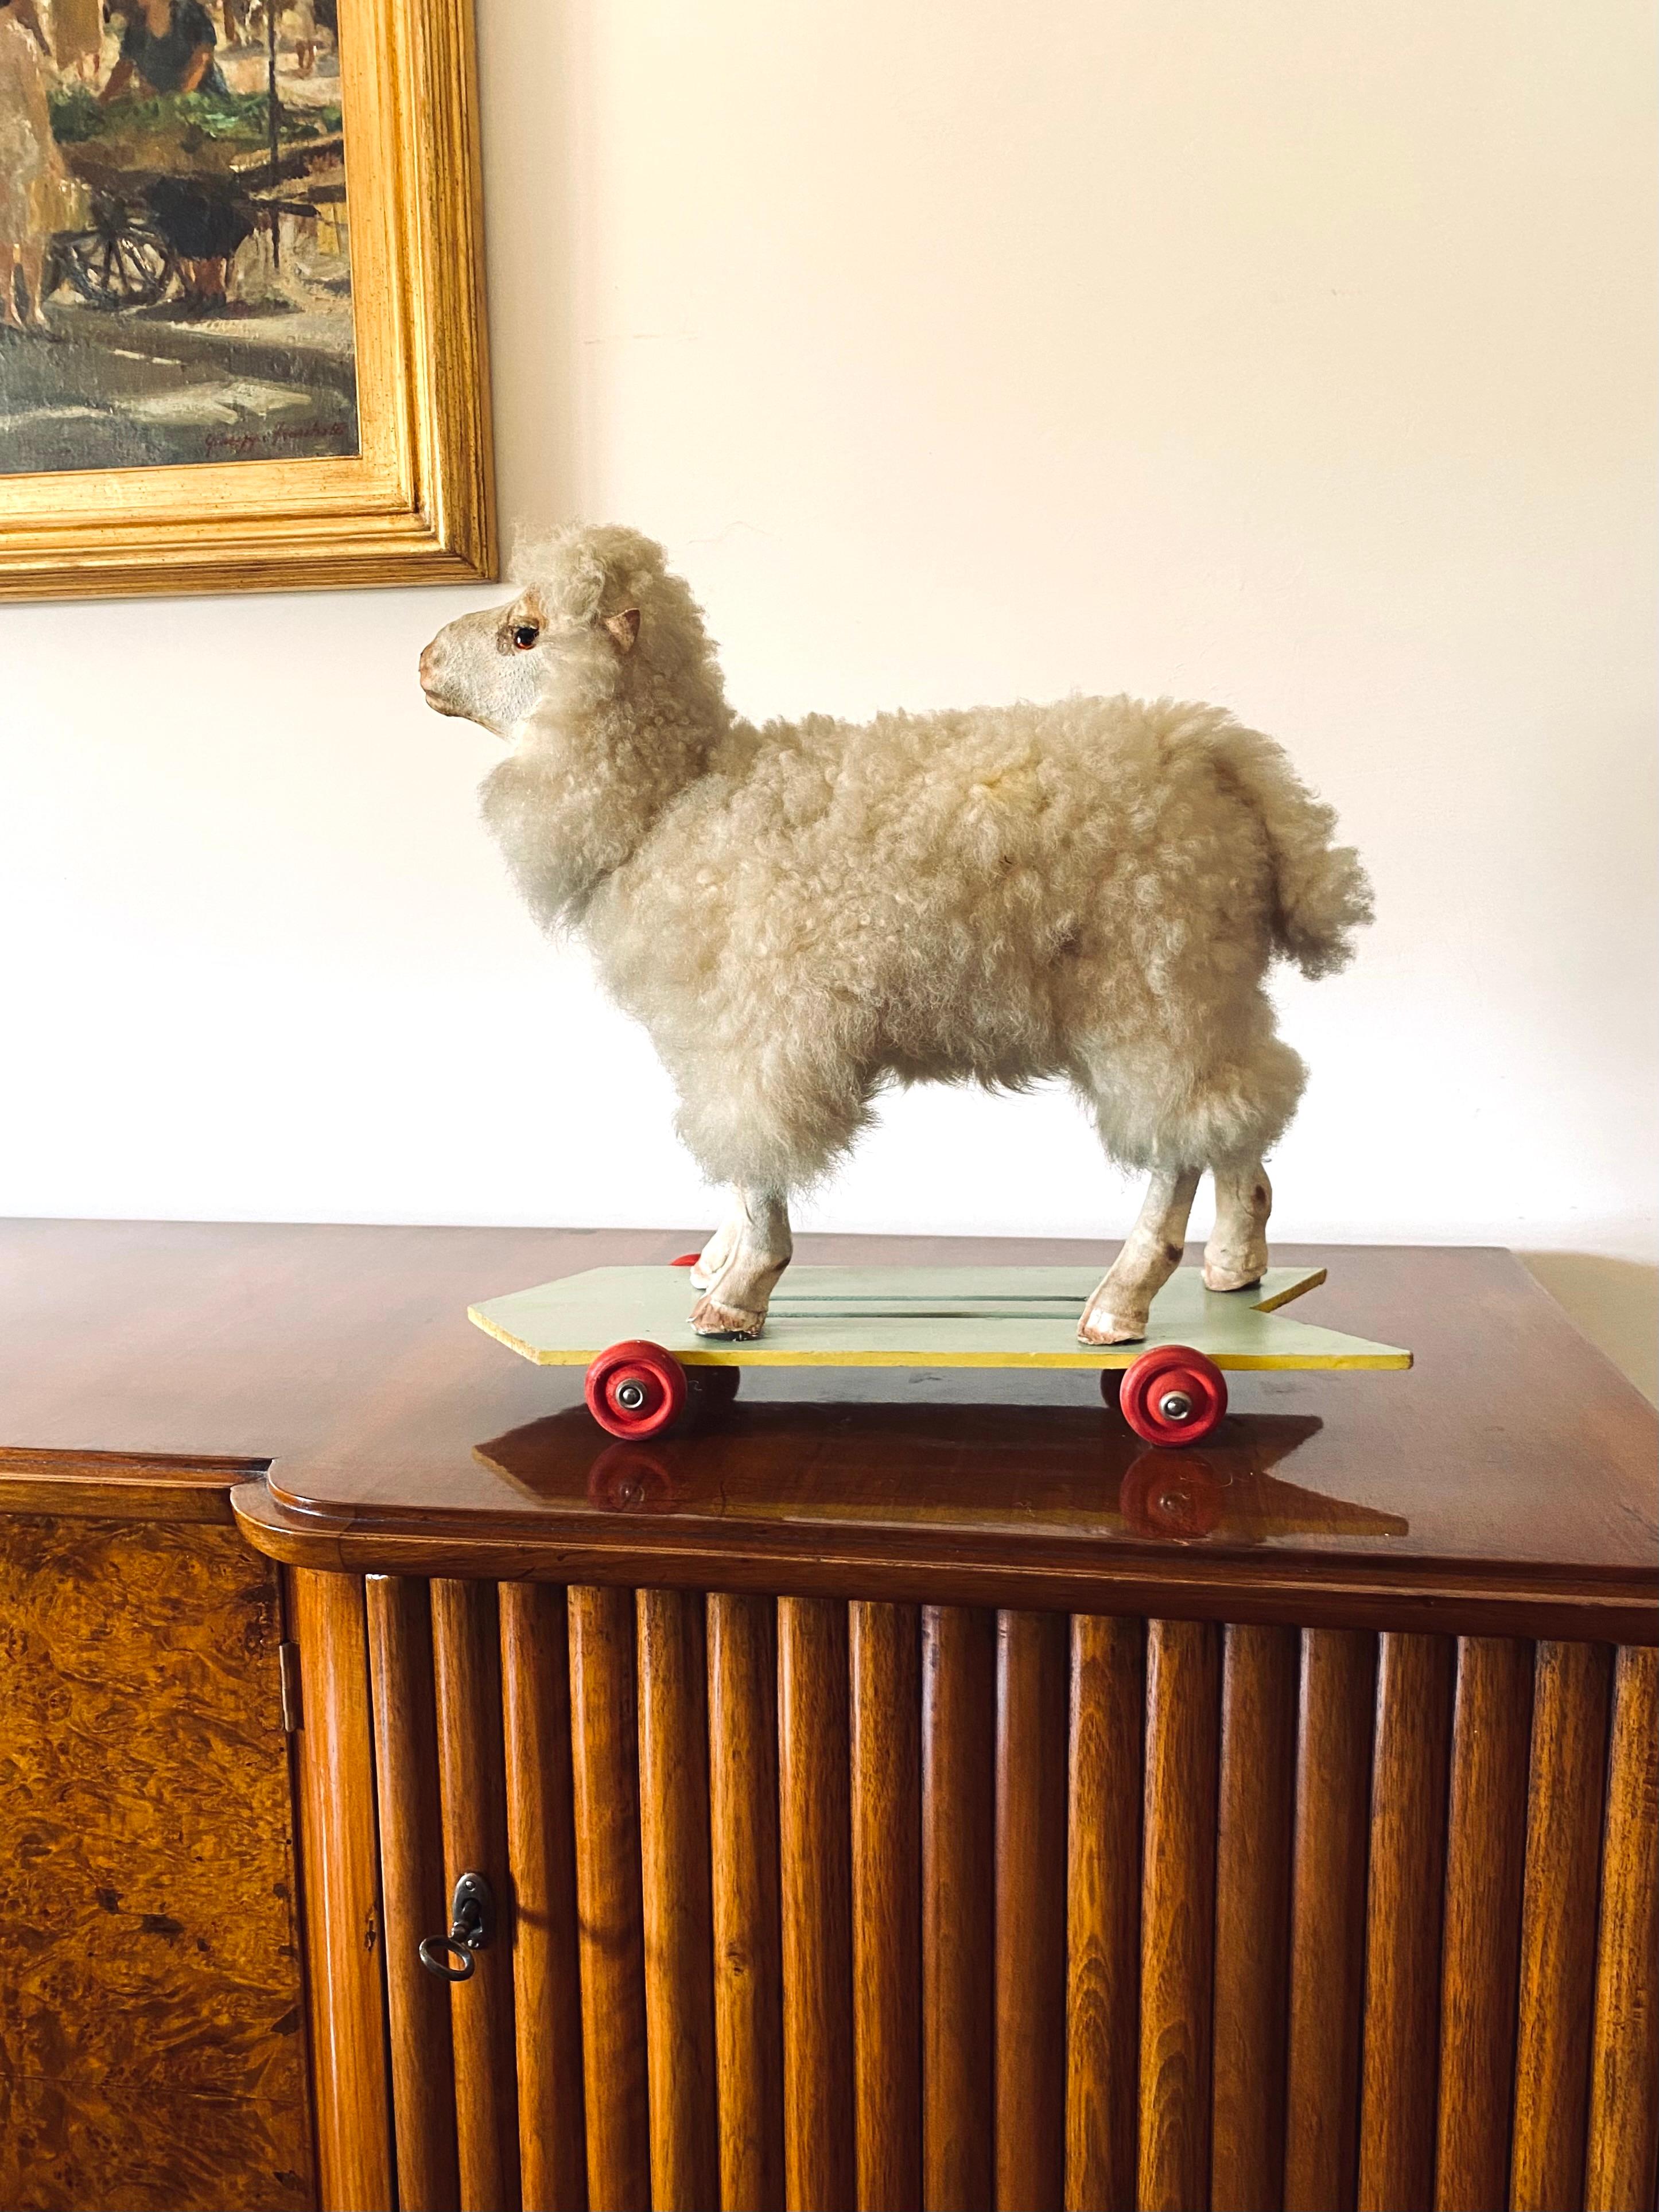 Folk Art sheep rolling toy

Germany, first half of 20th century

wool, wood, fabric

Bending the neck the sheep bleats. 

High craftsmanship.

H 40 cm - 46 x 18 cm

Conditions: good consistent with age and use. The photos are considered